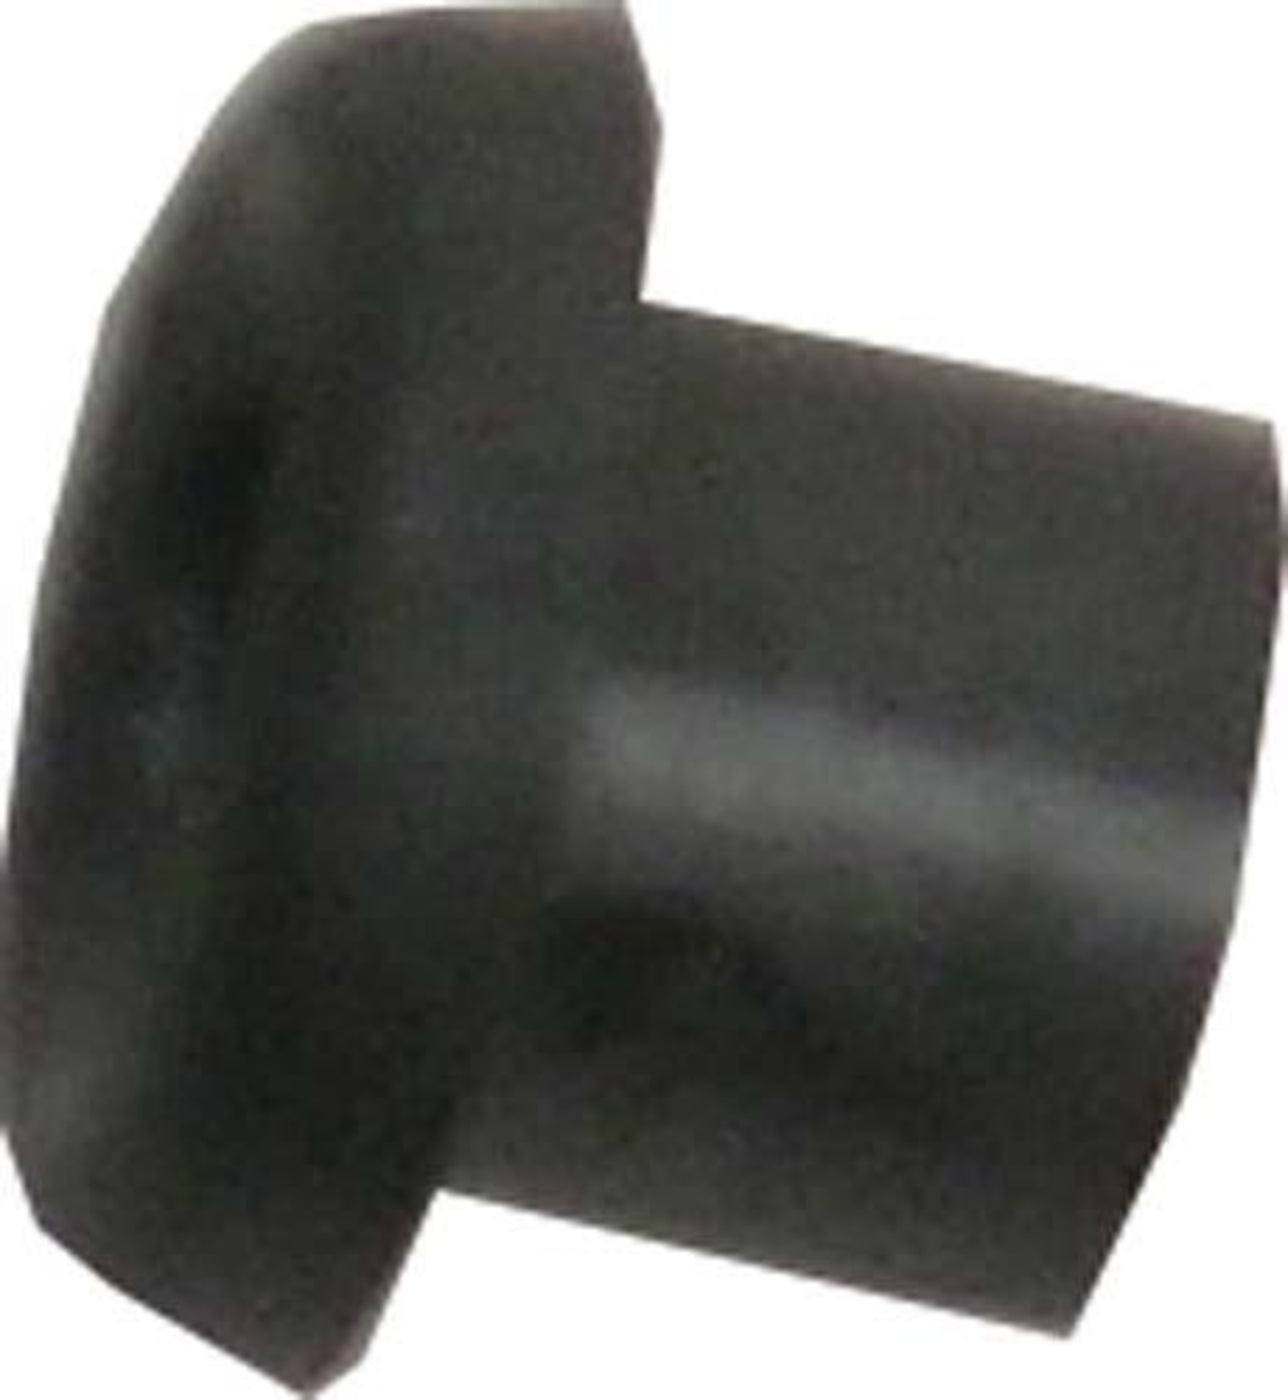 E-Z-GO ST480 Gas Shifter Arm Bushing (Years 2009-Up)